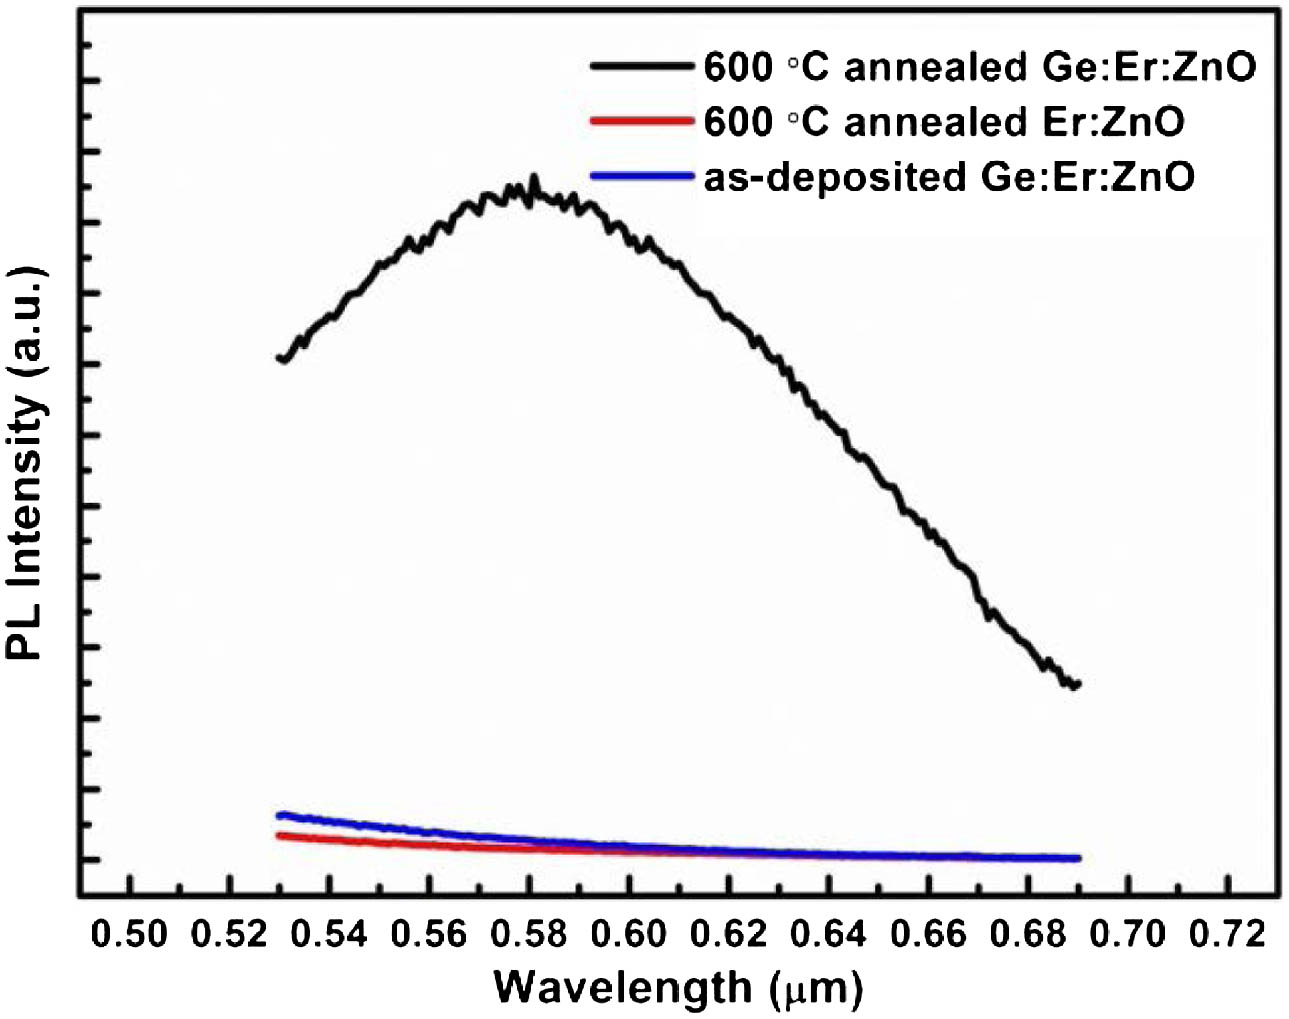 Visible PL spectra of as-deposited, 600°C annealed Ge:Er:ZnO and 600°C annealed Er:ZnO films (all with Er∼0.6 at. %).